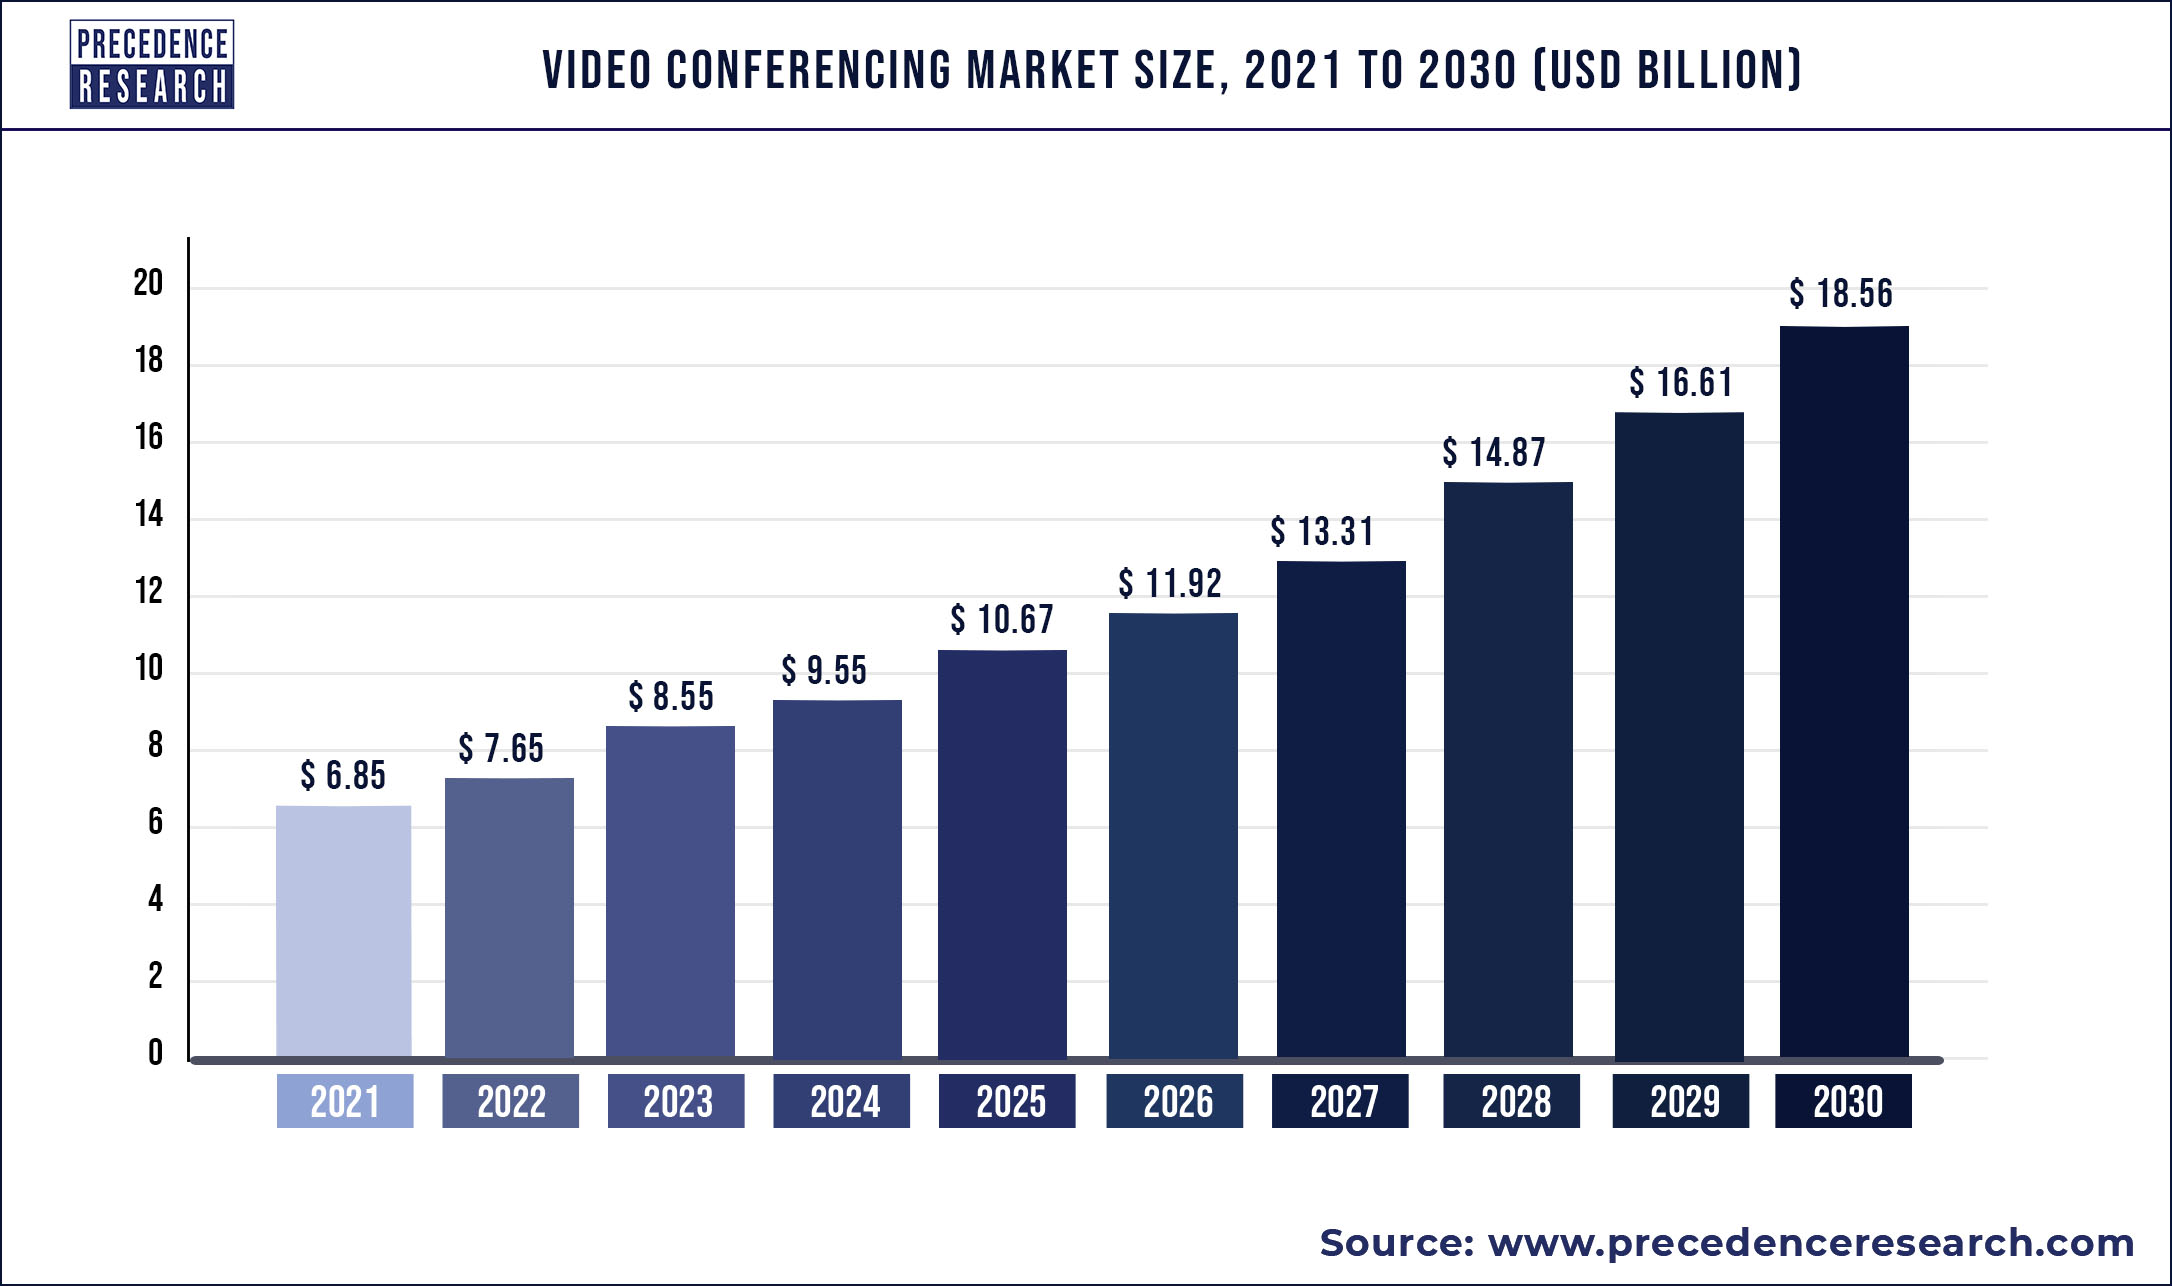 Video Conferencing Market Size is Forecasted to Reach US$ 18.56 Billion by 2030